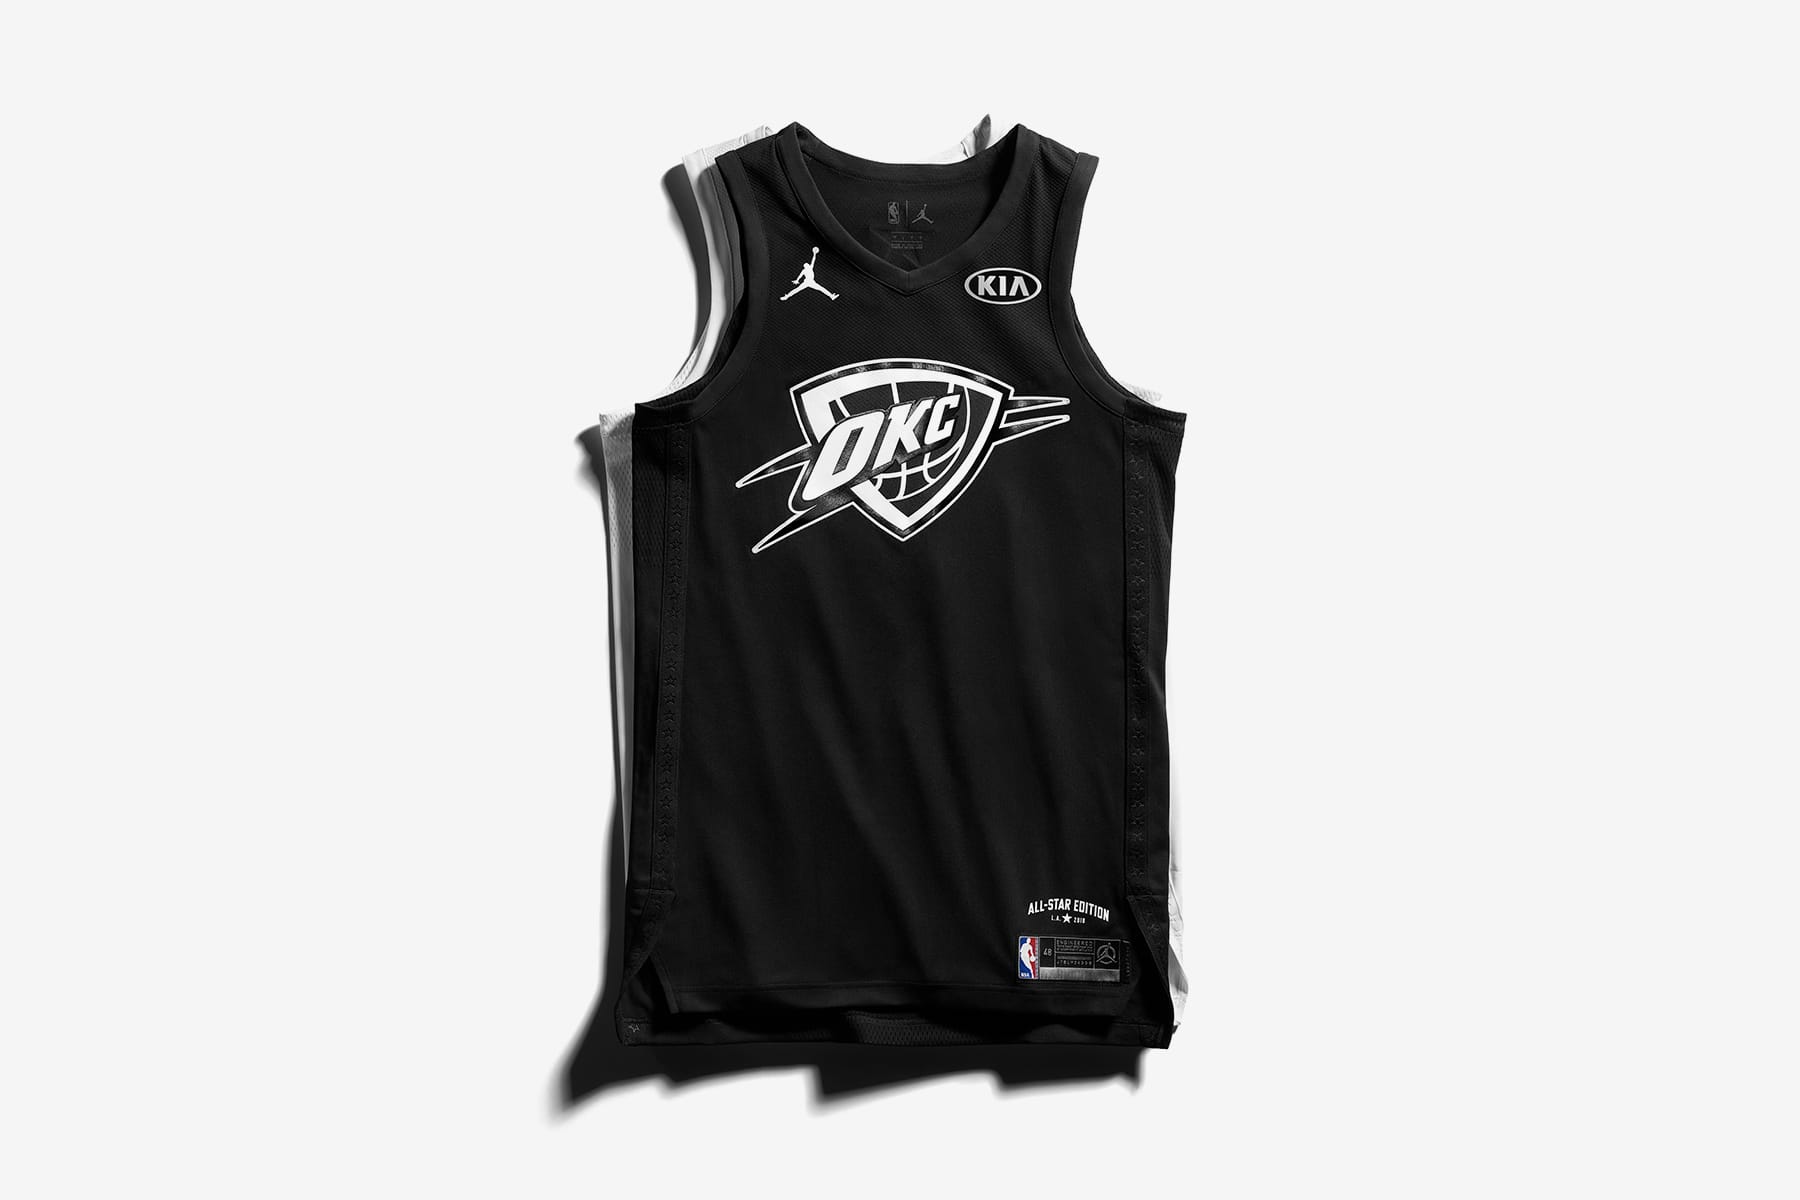 russell westbrook 2018 all star jersey